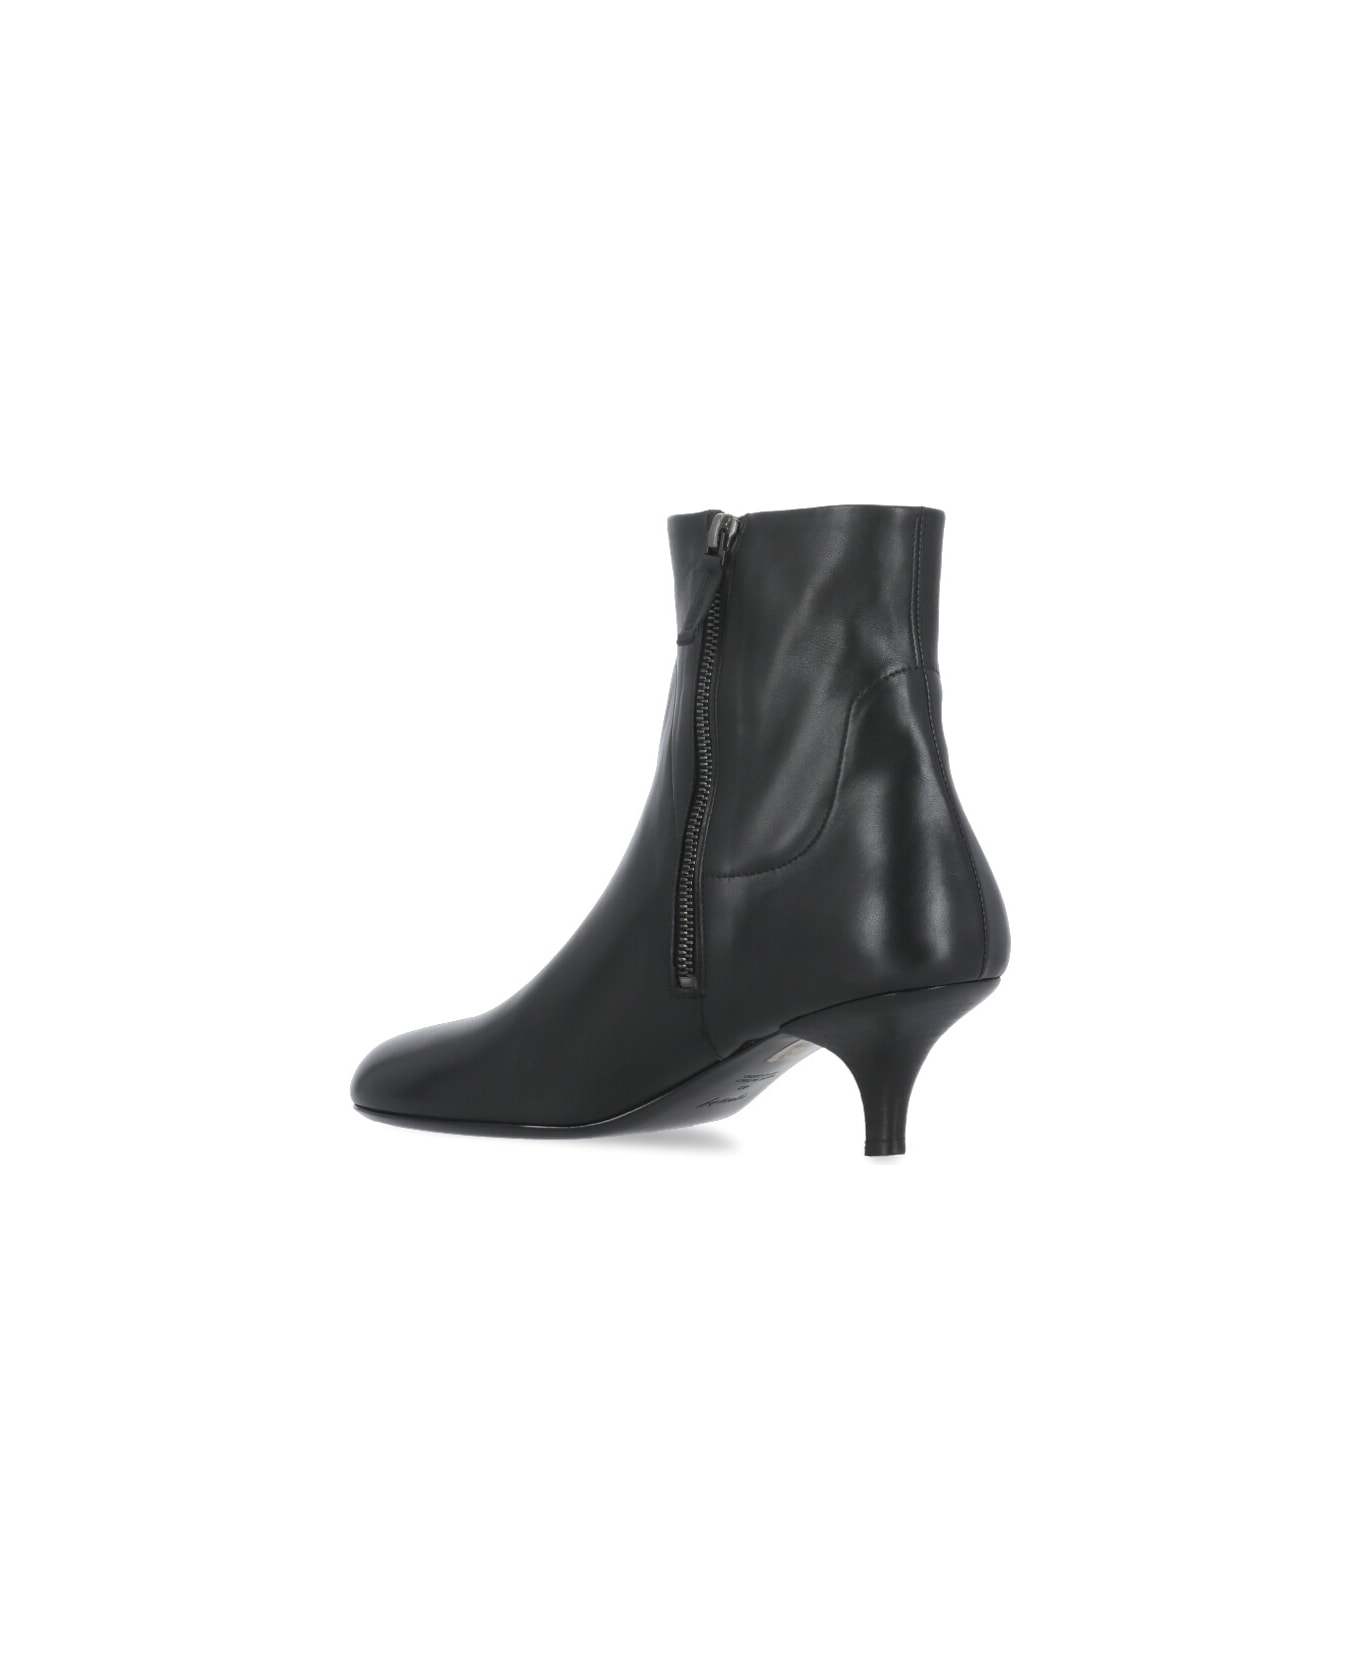 Marsell Spilla Ankle Boots - Black ブーツ